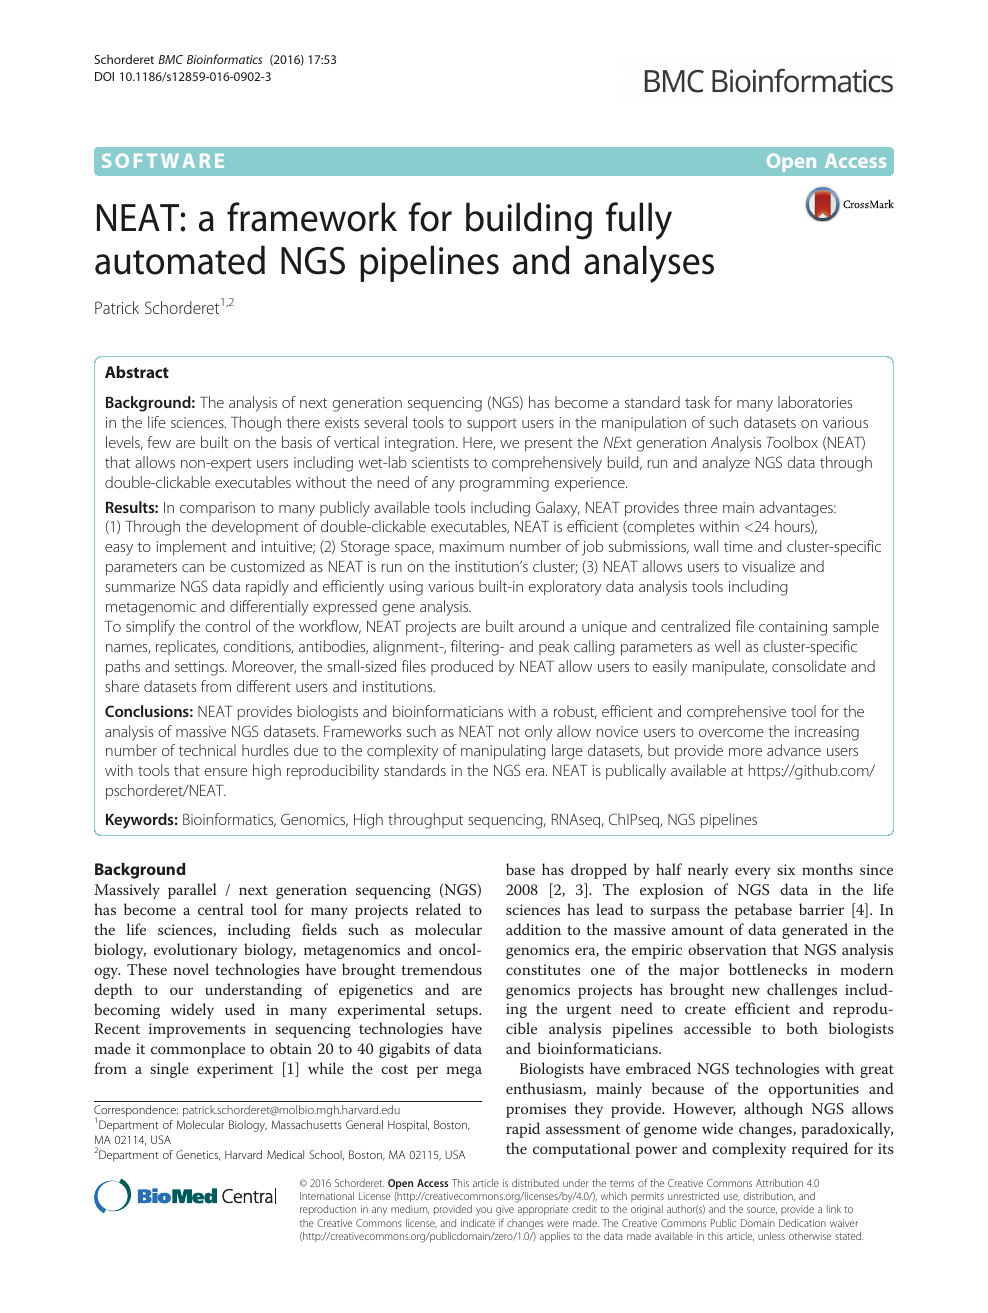 Neat A Framework For Building Fully Automated Ngs Pipelines And Analyses Topic Of Research Paper In Biological Sciences Download Scholarly Article Pdf And Read For Free On Cyberleninka Open Science Hub